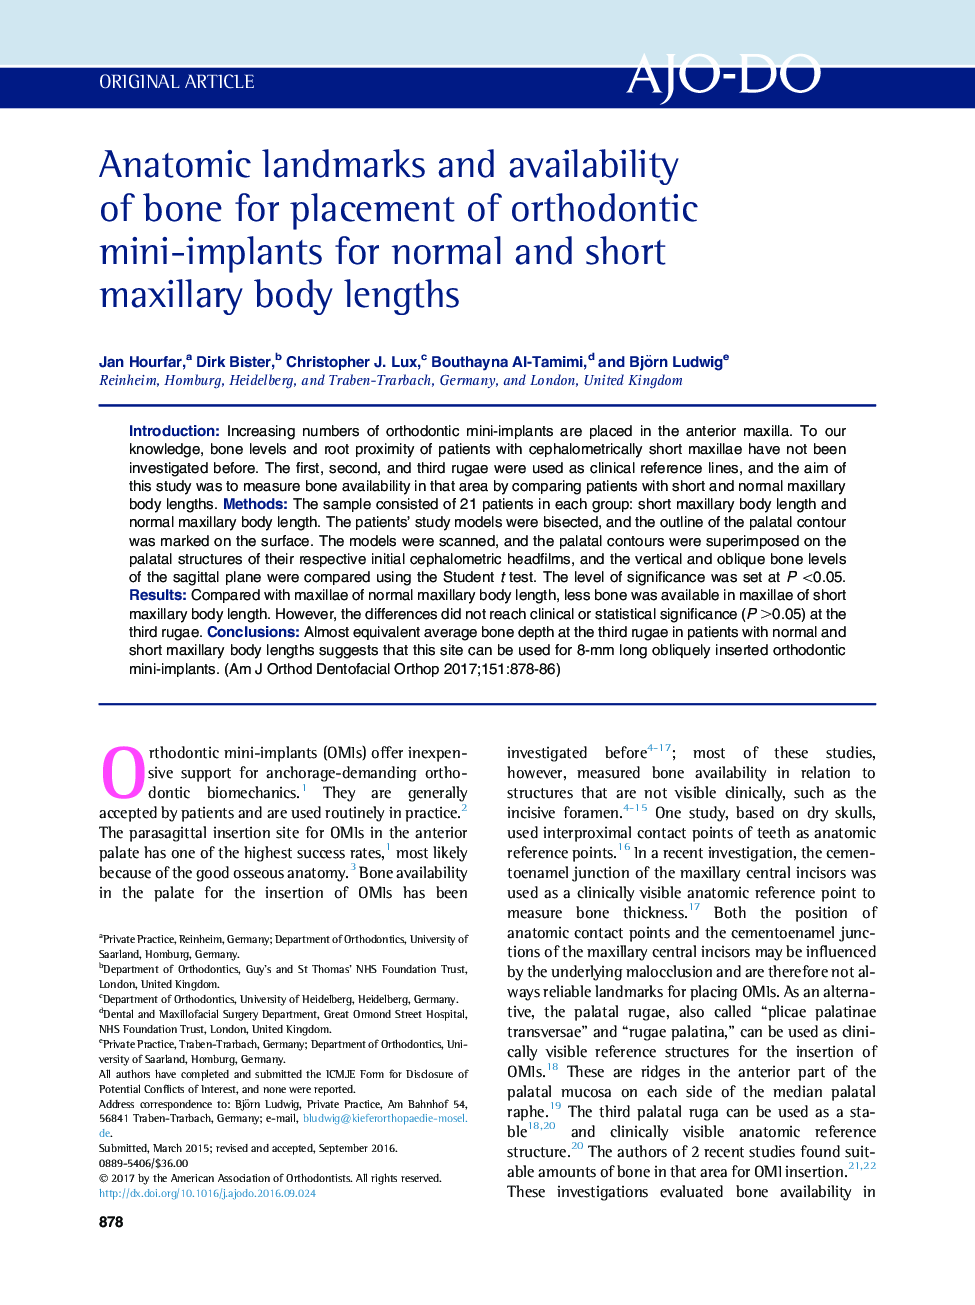 Anatomic landmarks and availability of bone for placement of orthodontic mini-implants for normal and short maxillary body lengths